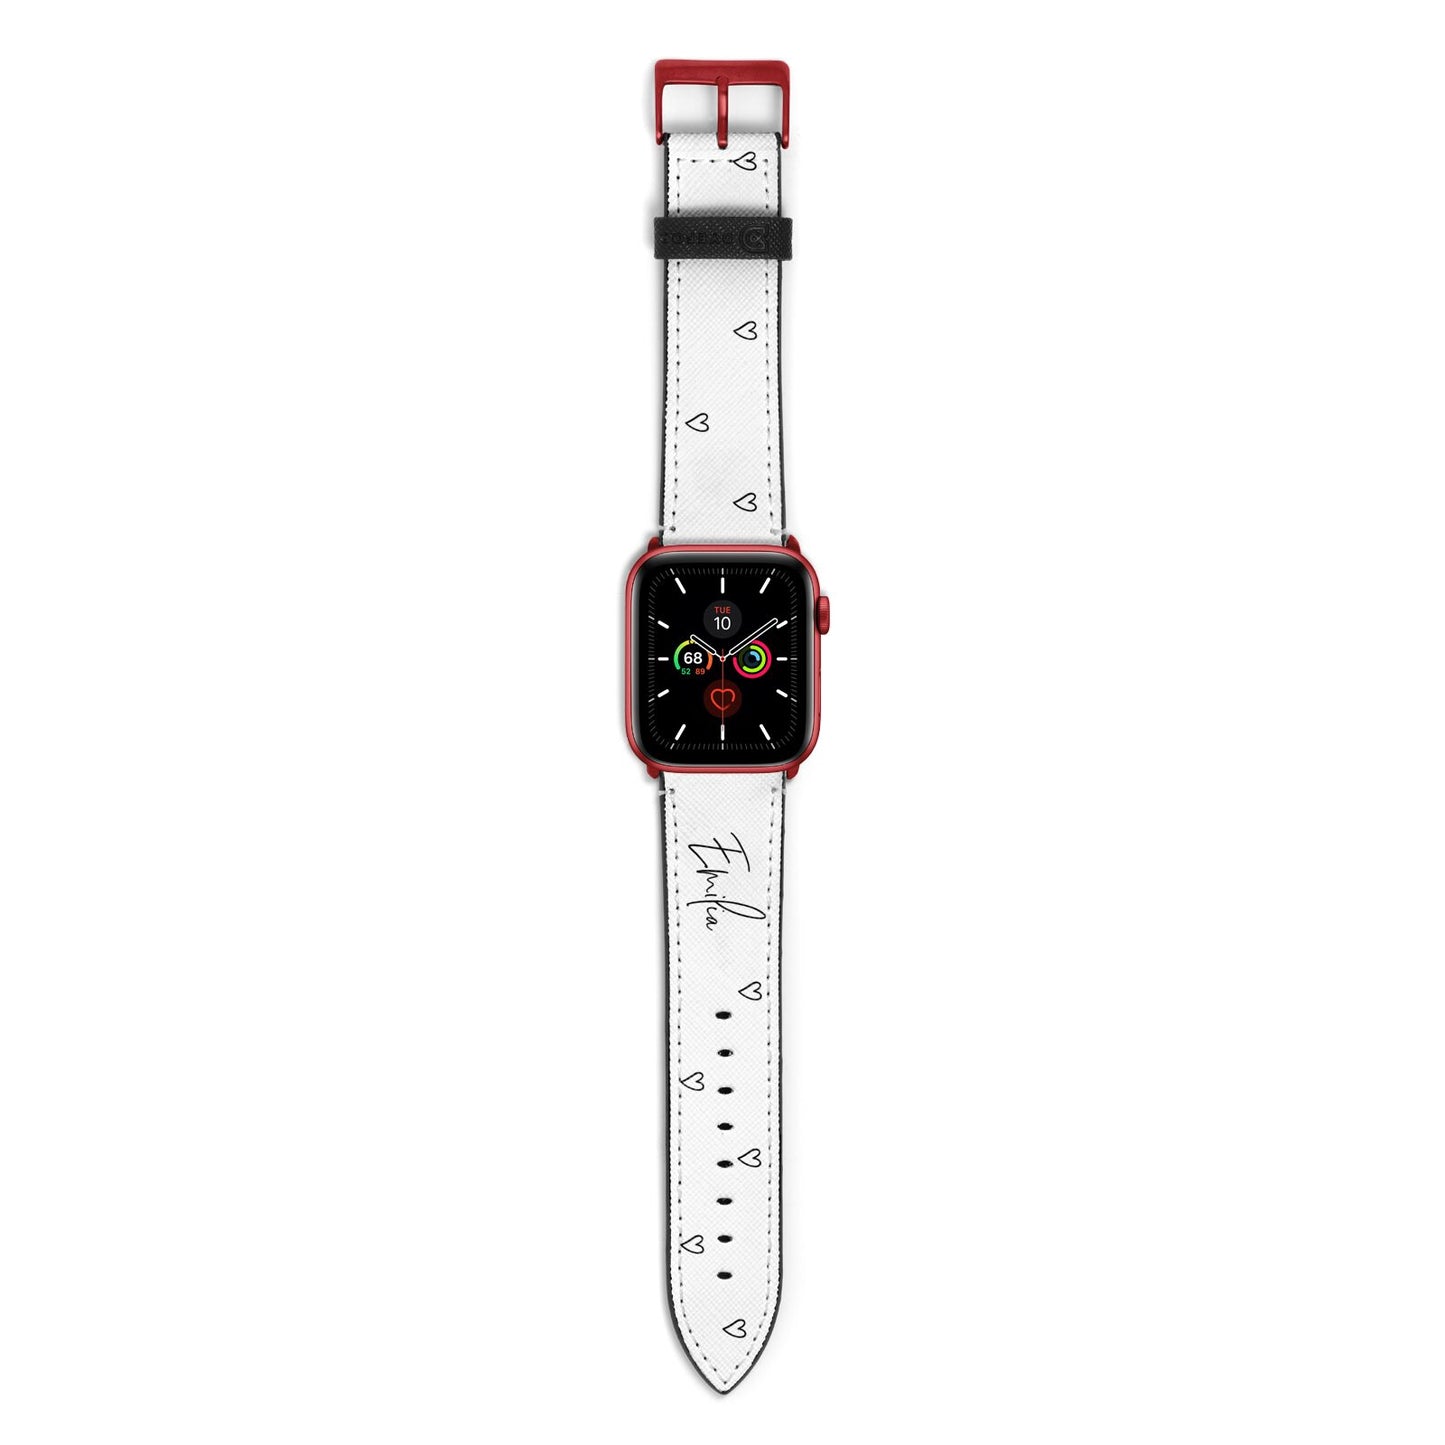 Transparent Black Handwritten Name Apple Watch Strap with Red Hardware